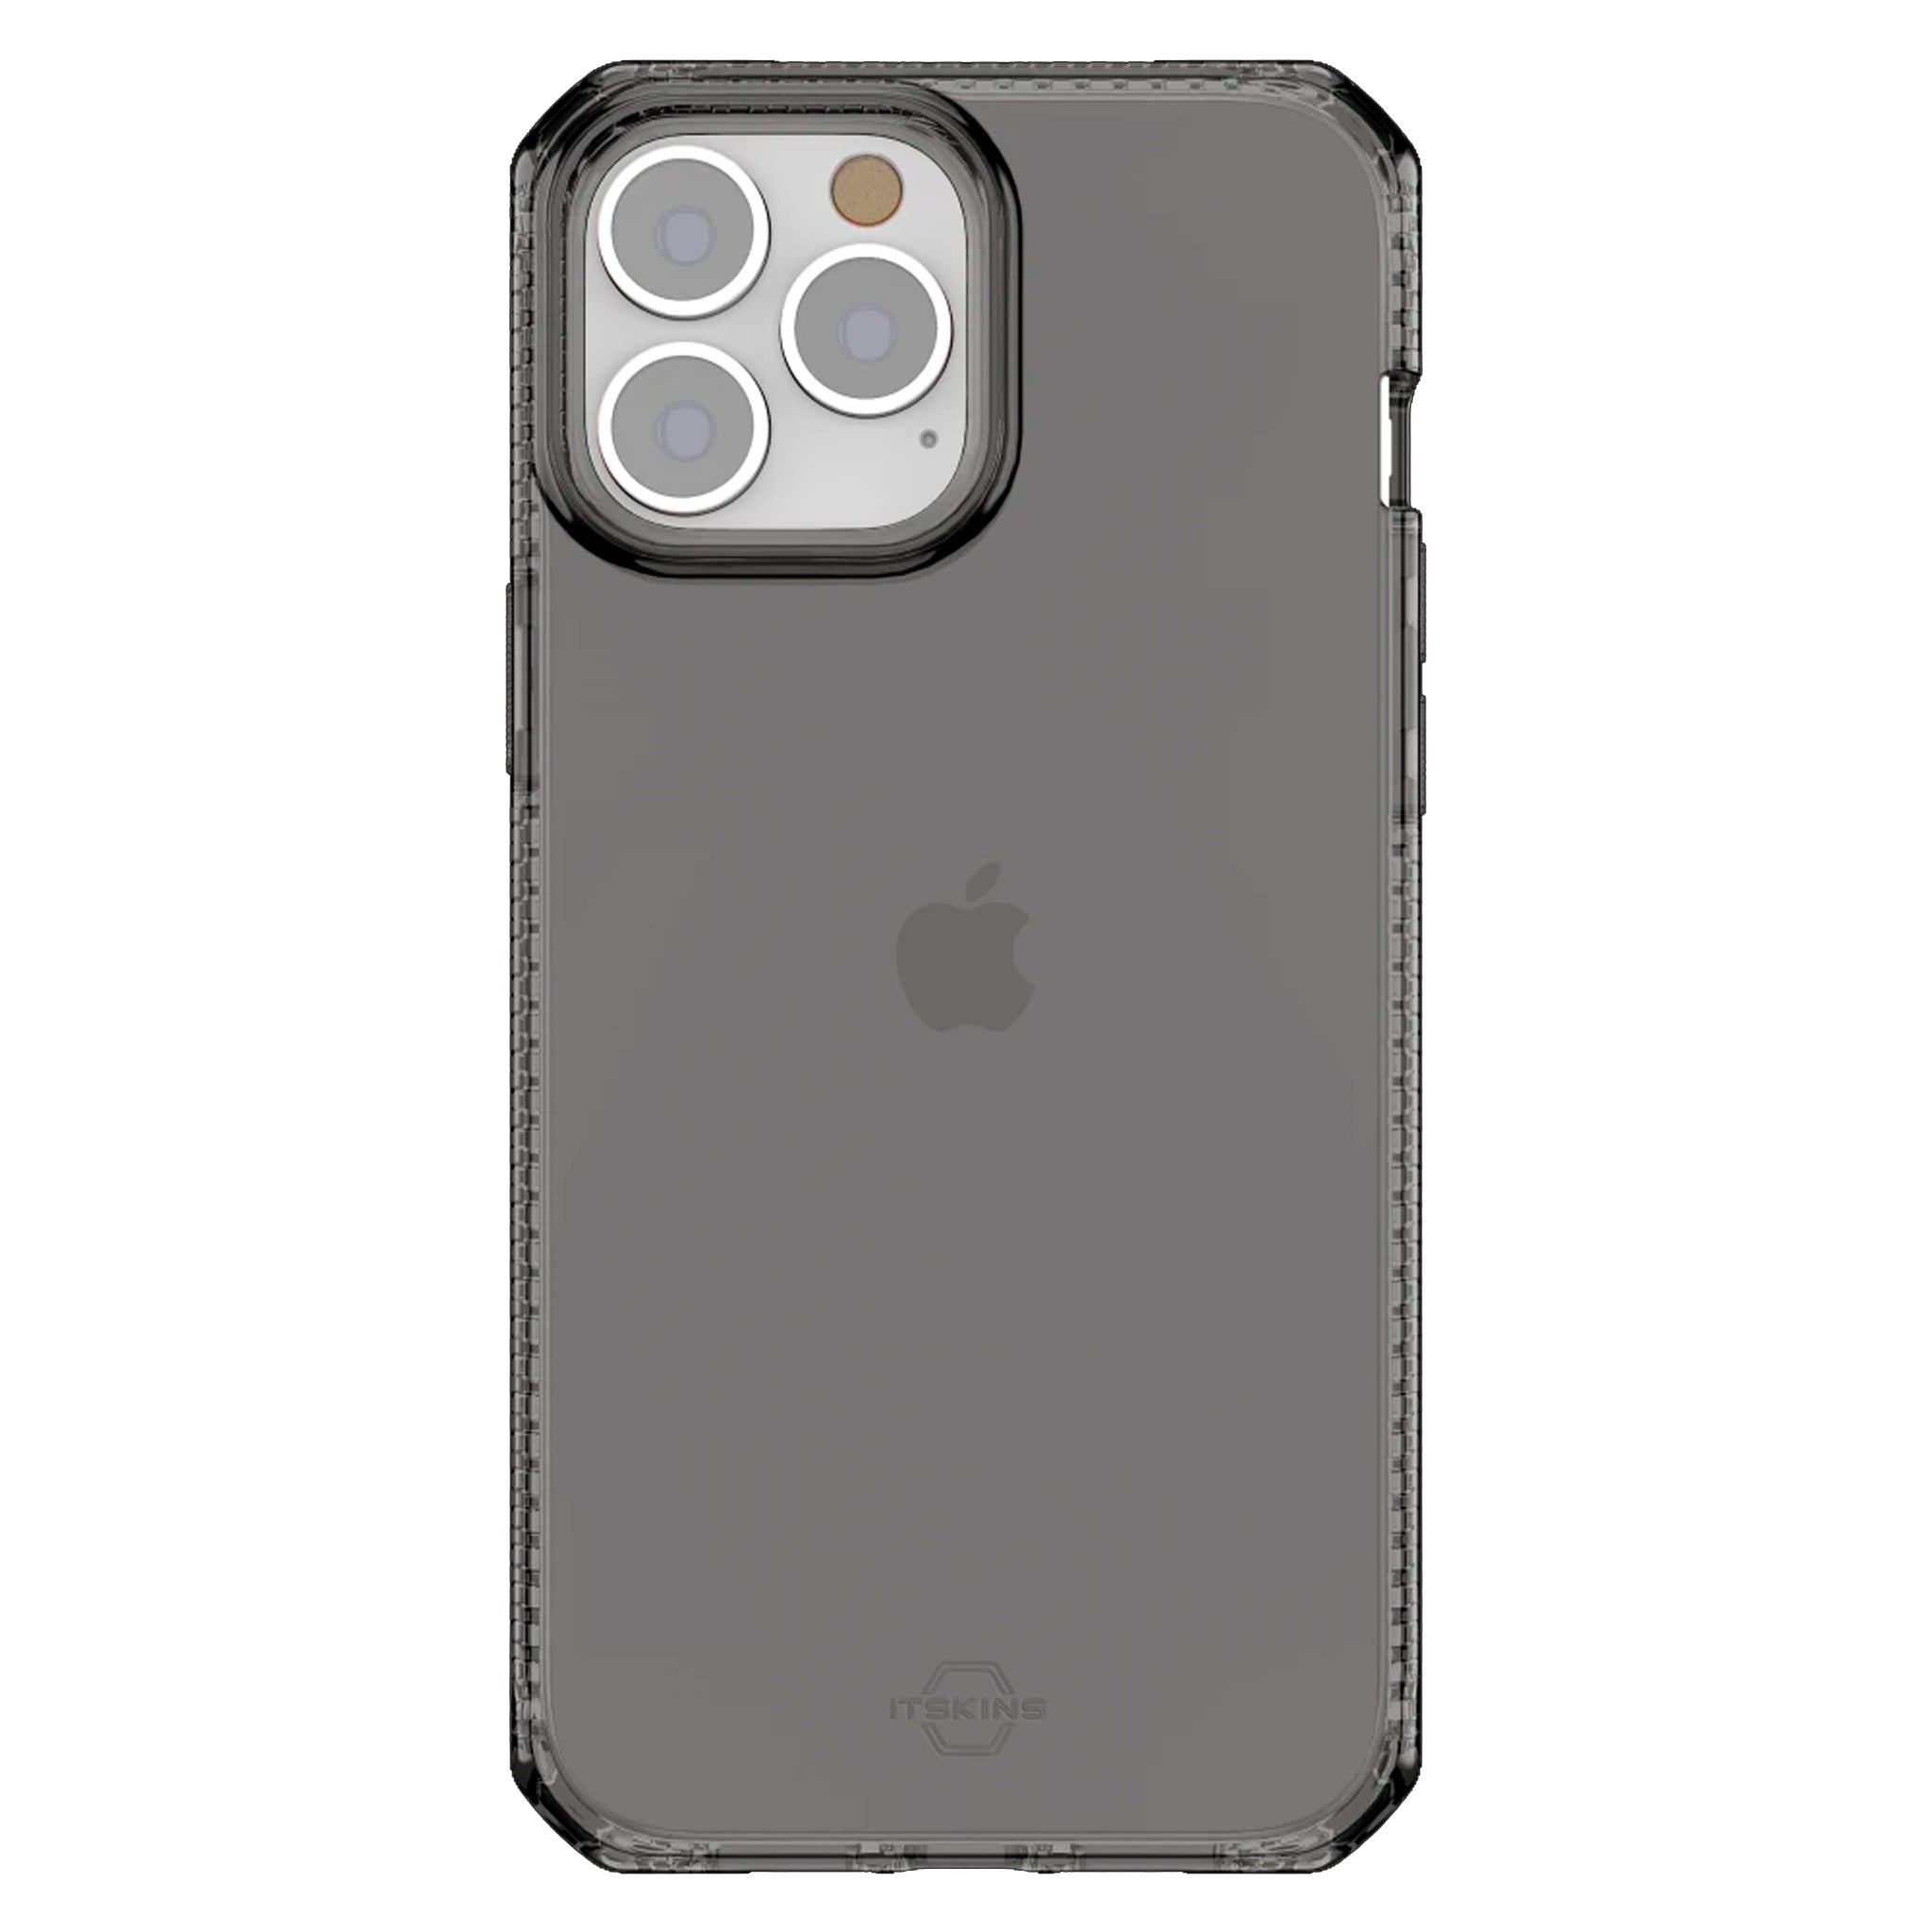 Itskins - Spectrum Clear Case For Apple Iphone 13 Pro Max / 12 Pro Max - Smoke